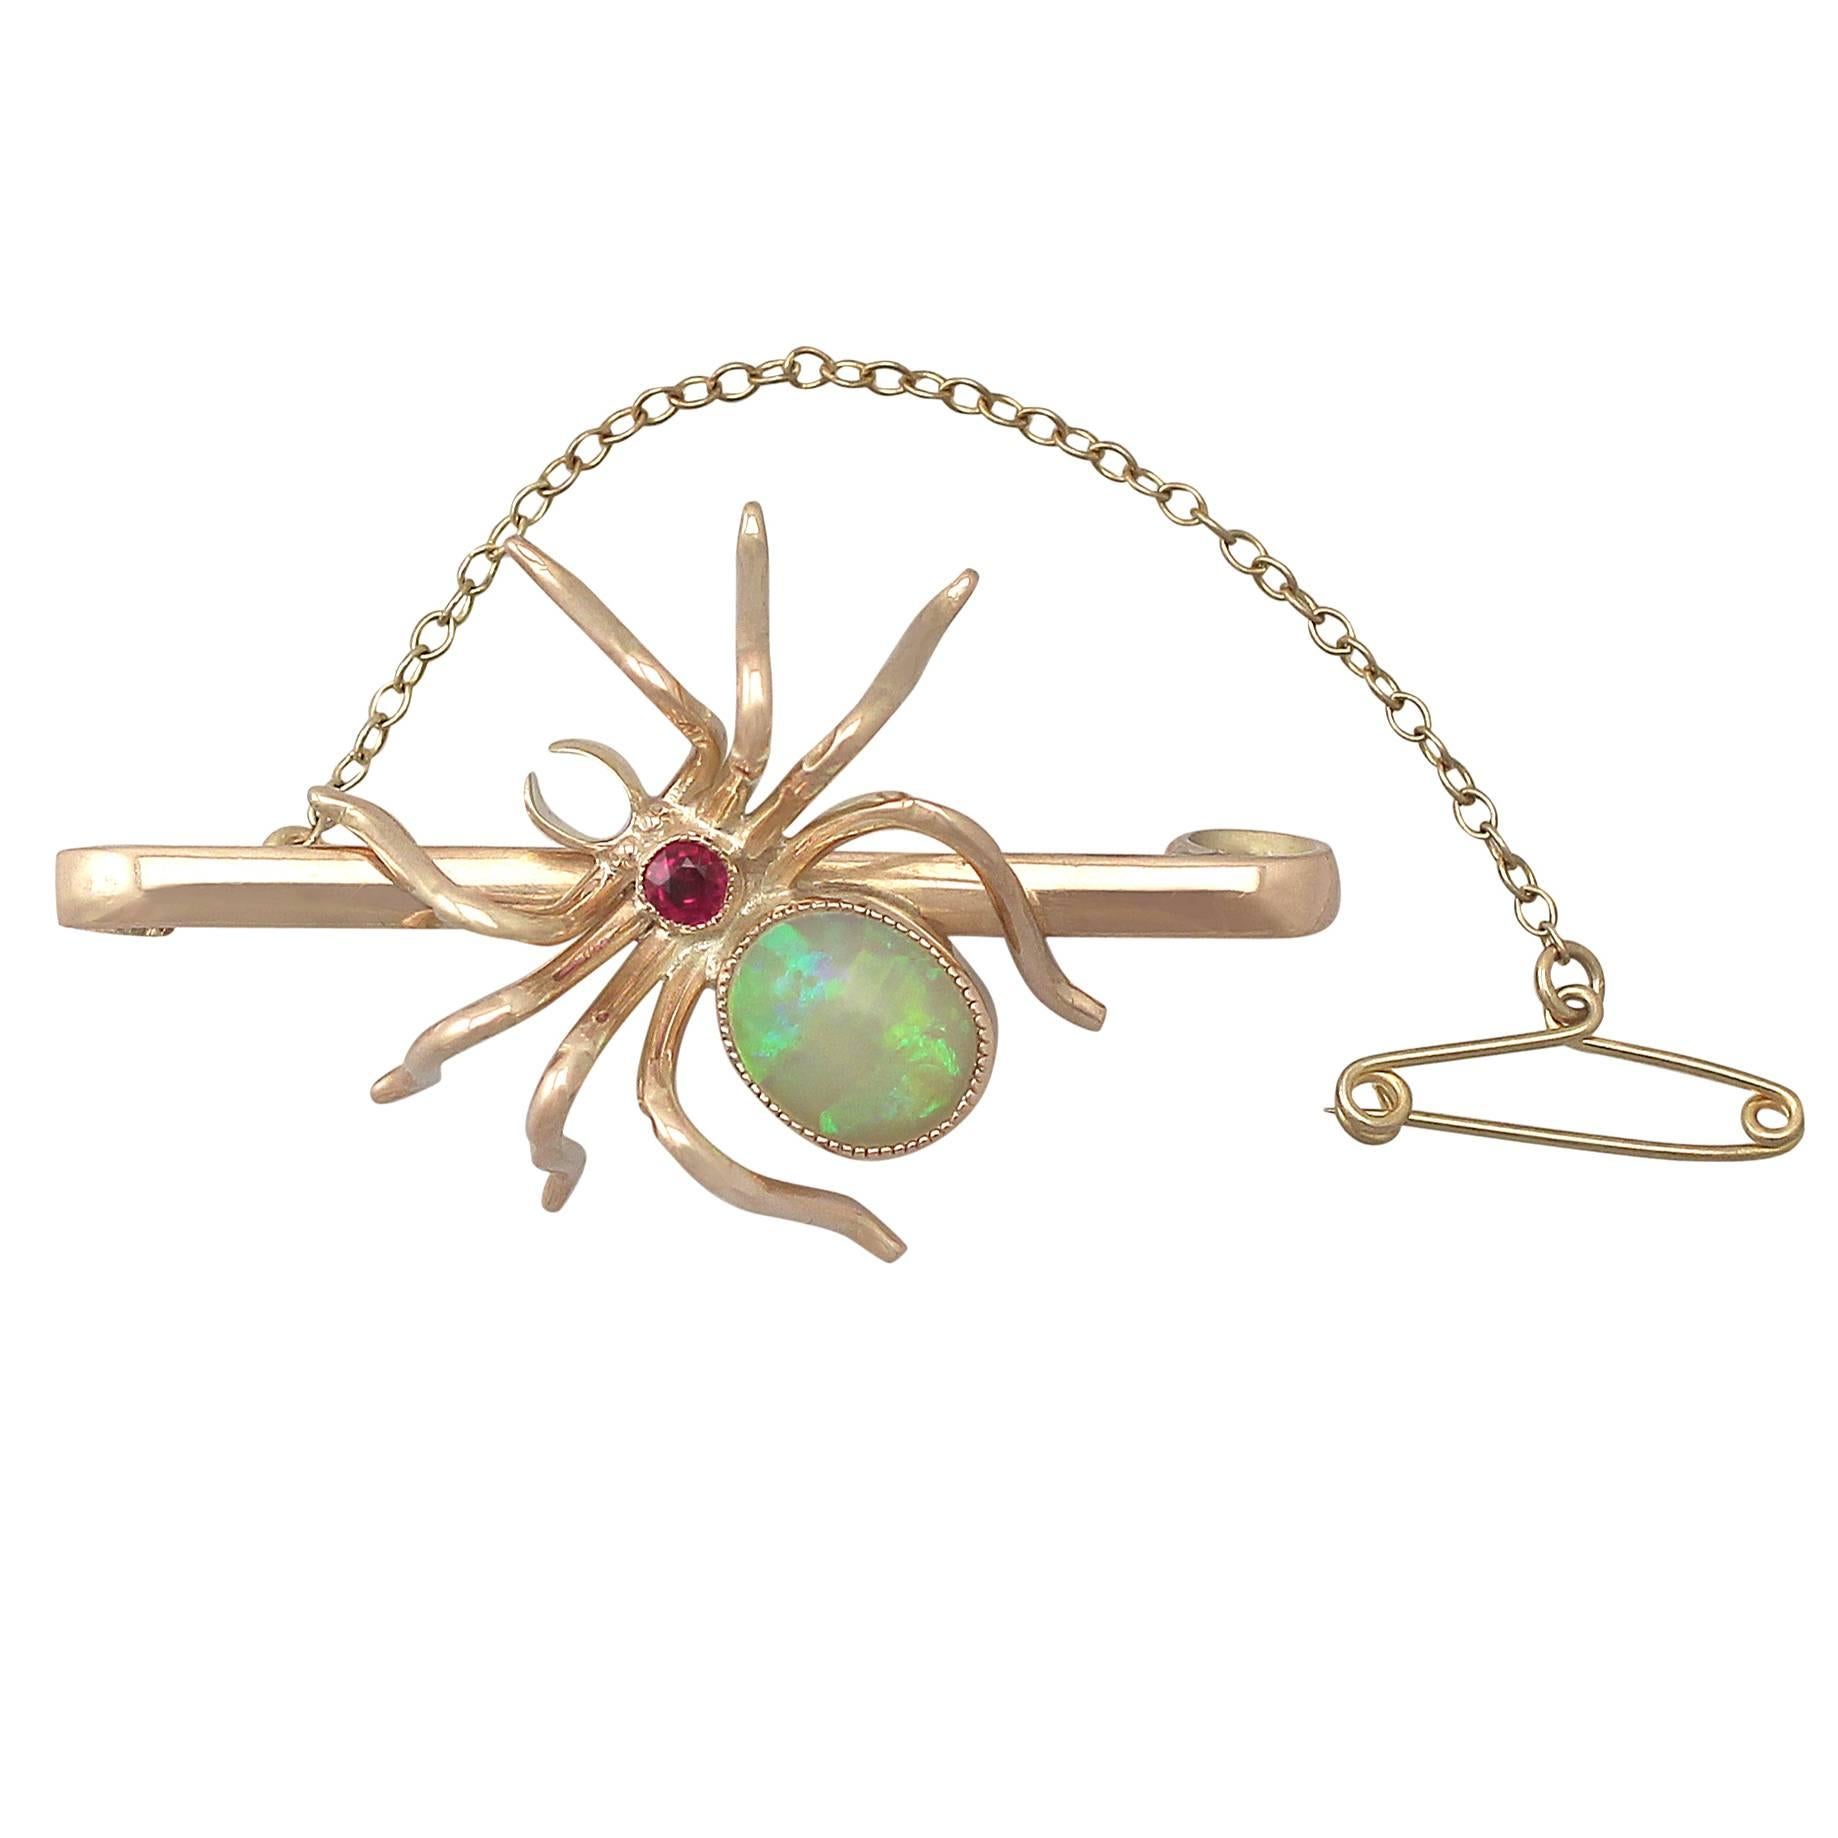 1.22Ct Opal & 0.10Ct Ruby, 9k Yellow Gold 'Spider' Brooch - Antique Circa 1900